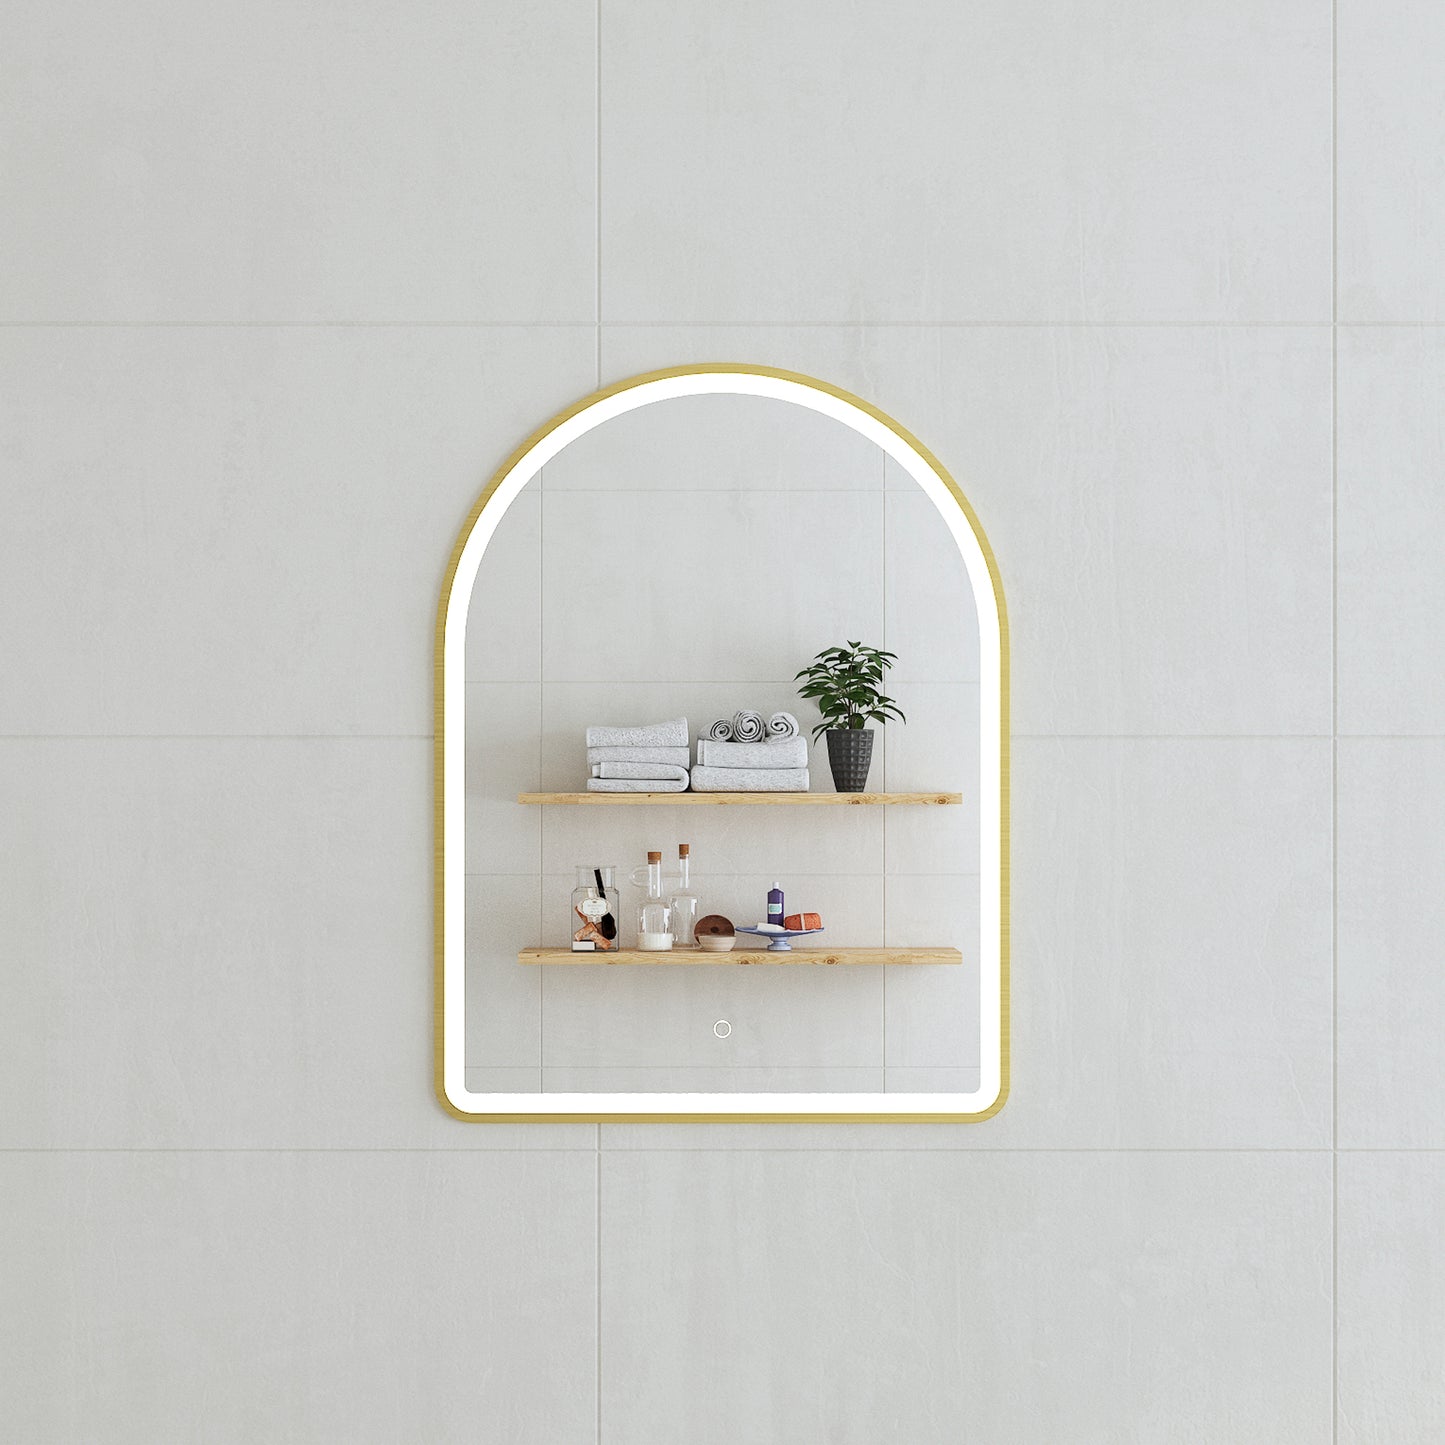 Arco Arch 600mm x 800mm Frontlit LED Framed Mirror in Brushed Brass (Gold) with Demister